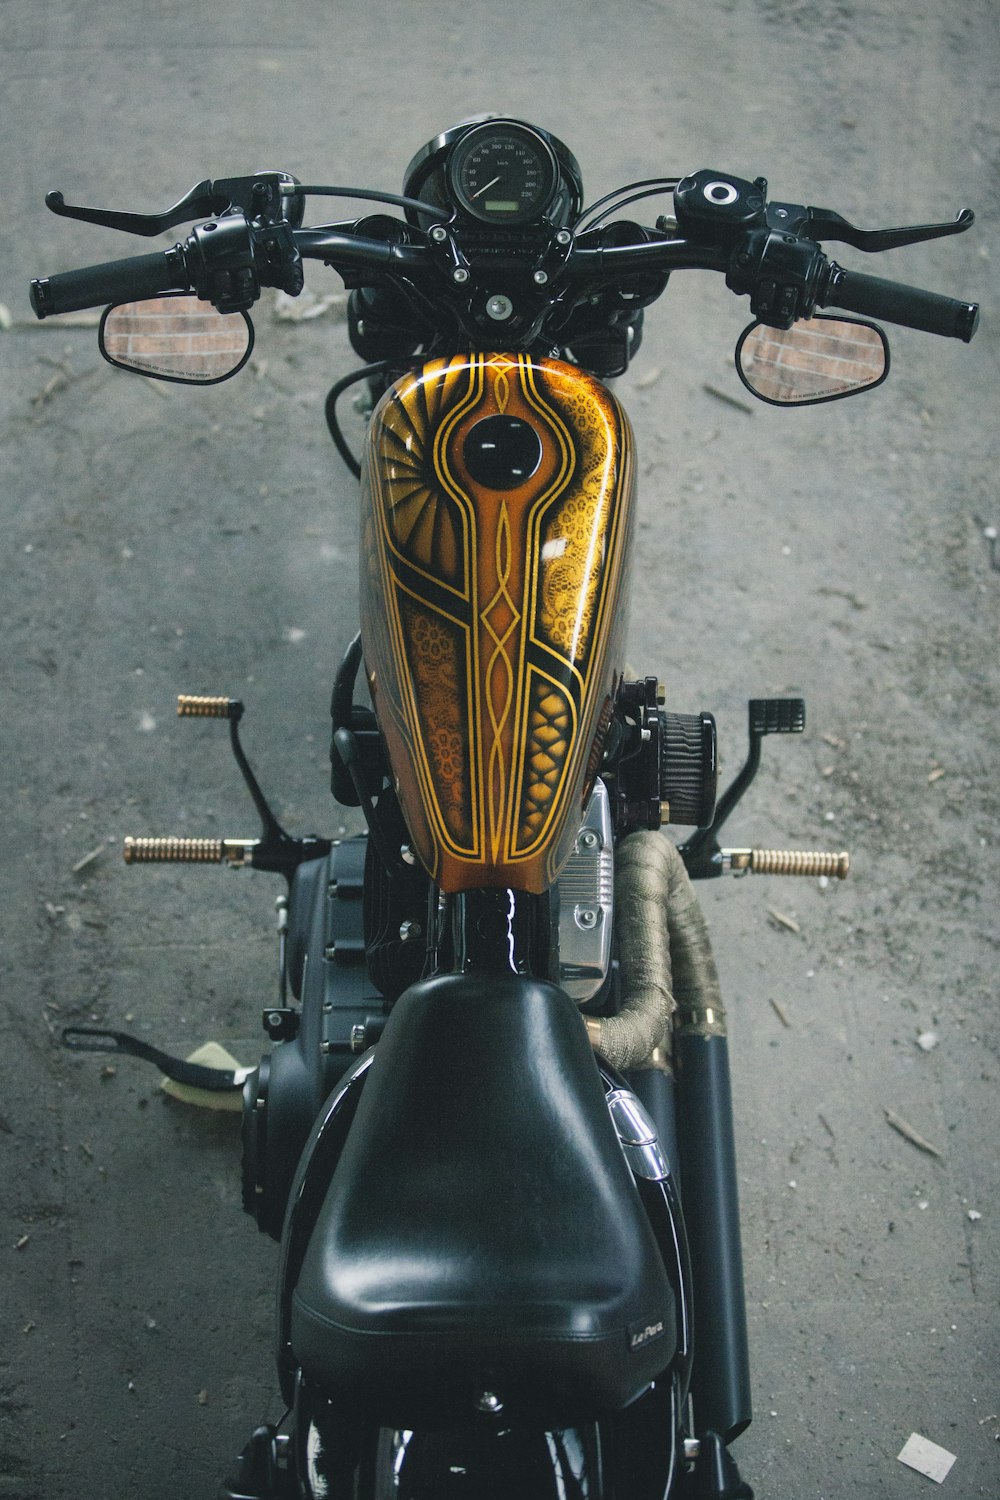 brown and black cruiser motorcycle